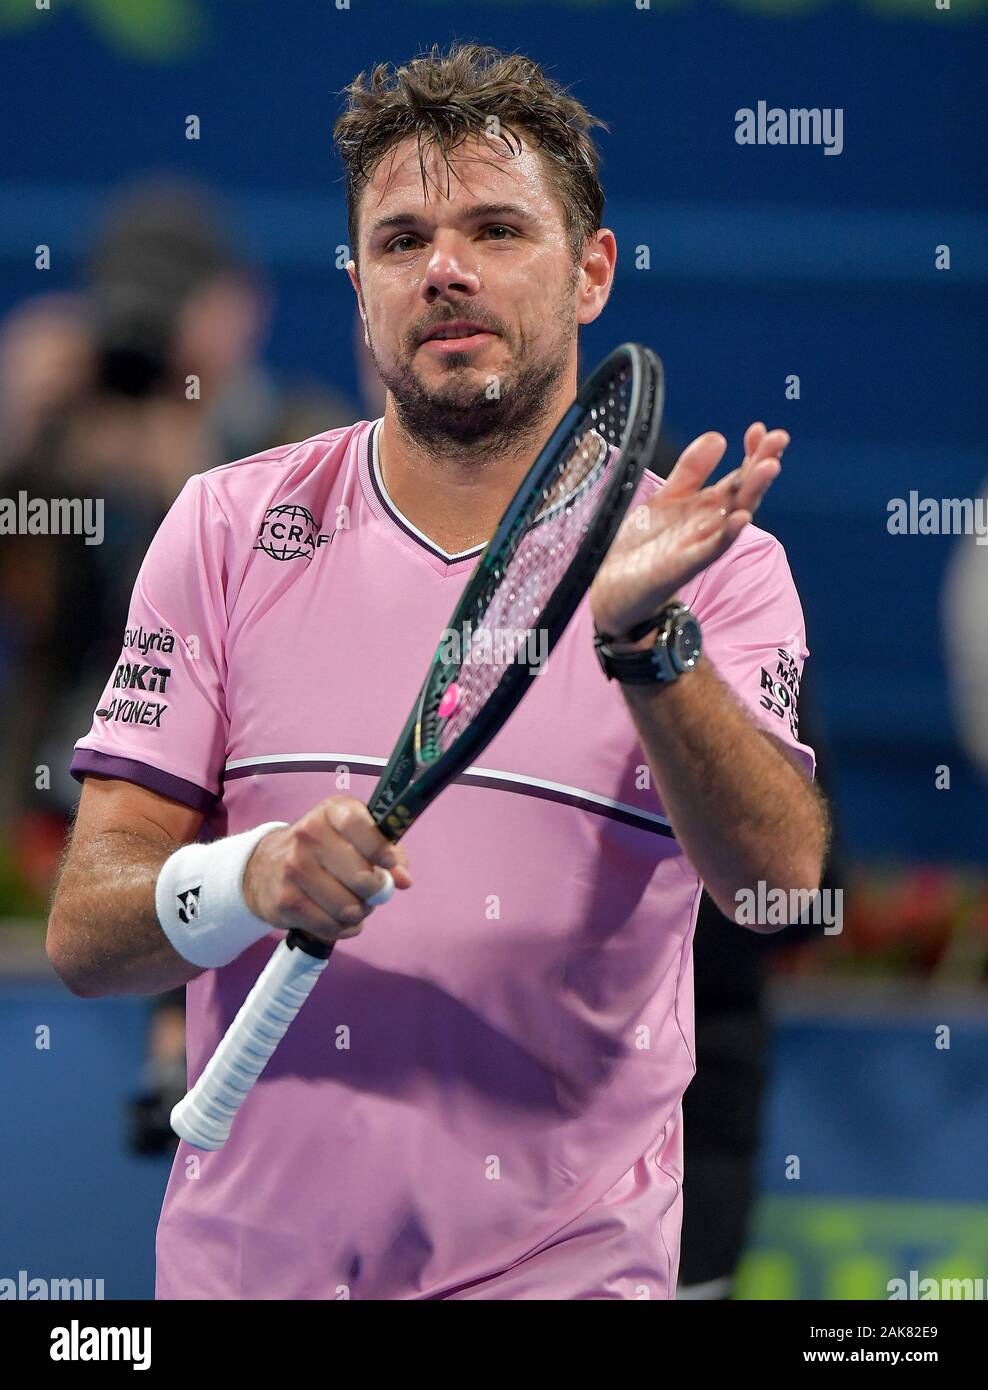 Doha, Qatar. 7th Jan, 2020. Stan Wawrinka of Switzerland celebrates after  the second round match against Jeremy Chardy of France at the ATP Qatar Open  tennis tournament at the Khalifa International Tennis